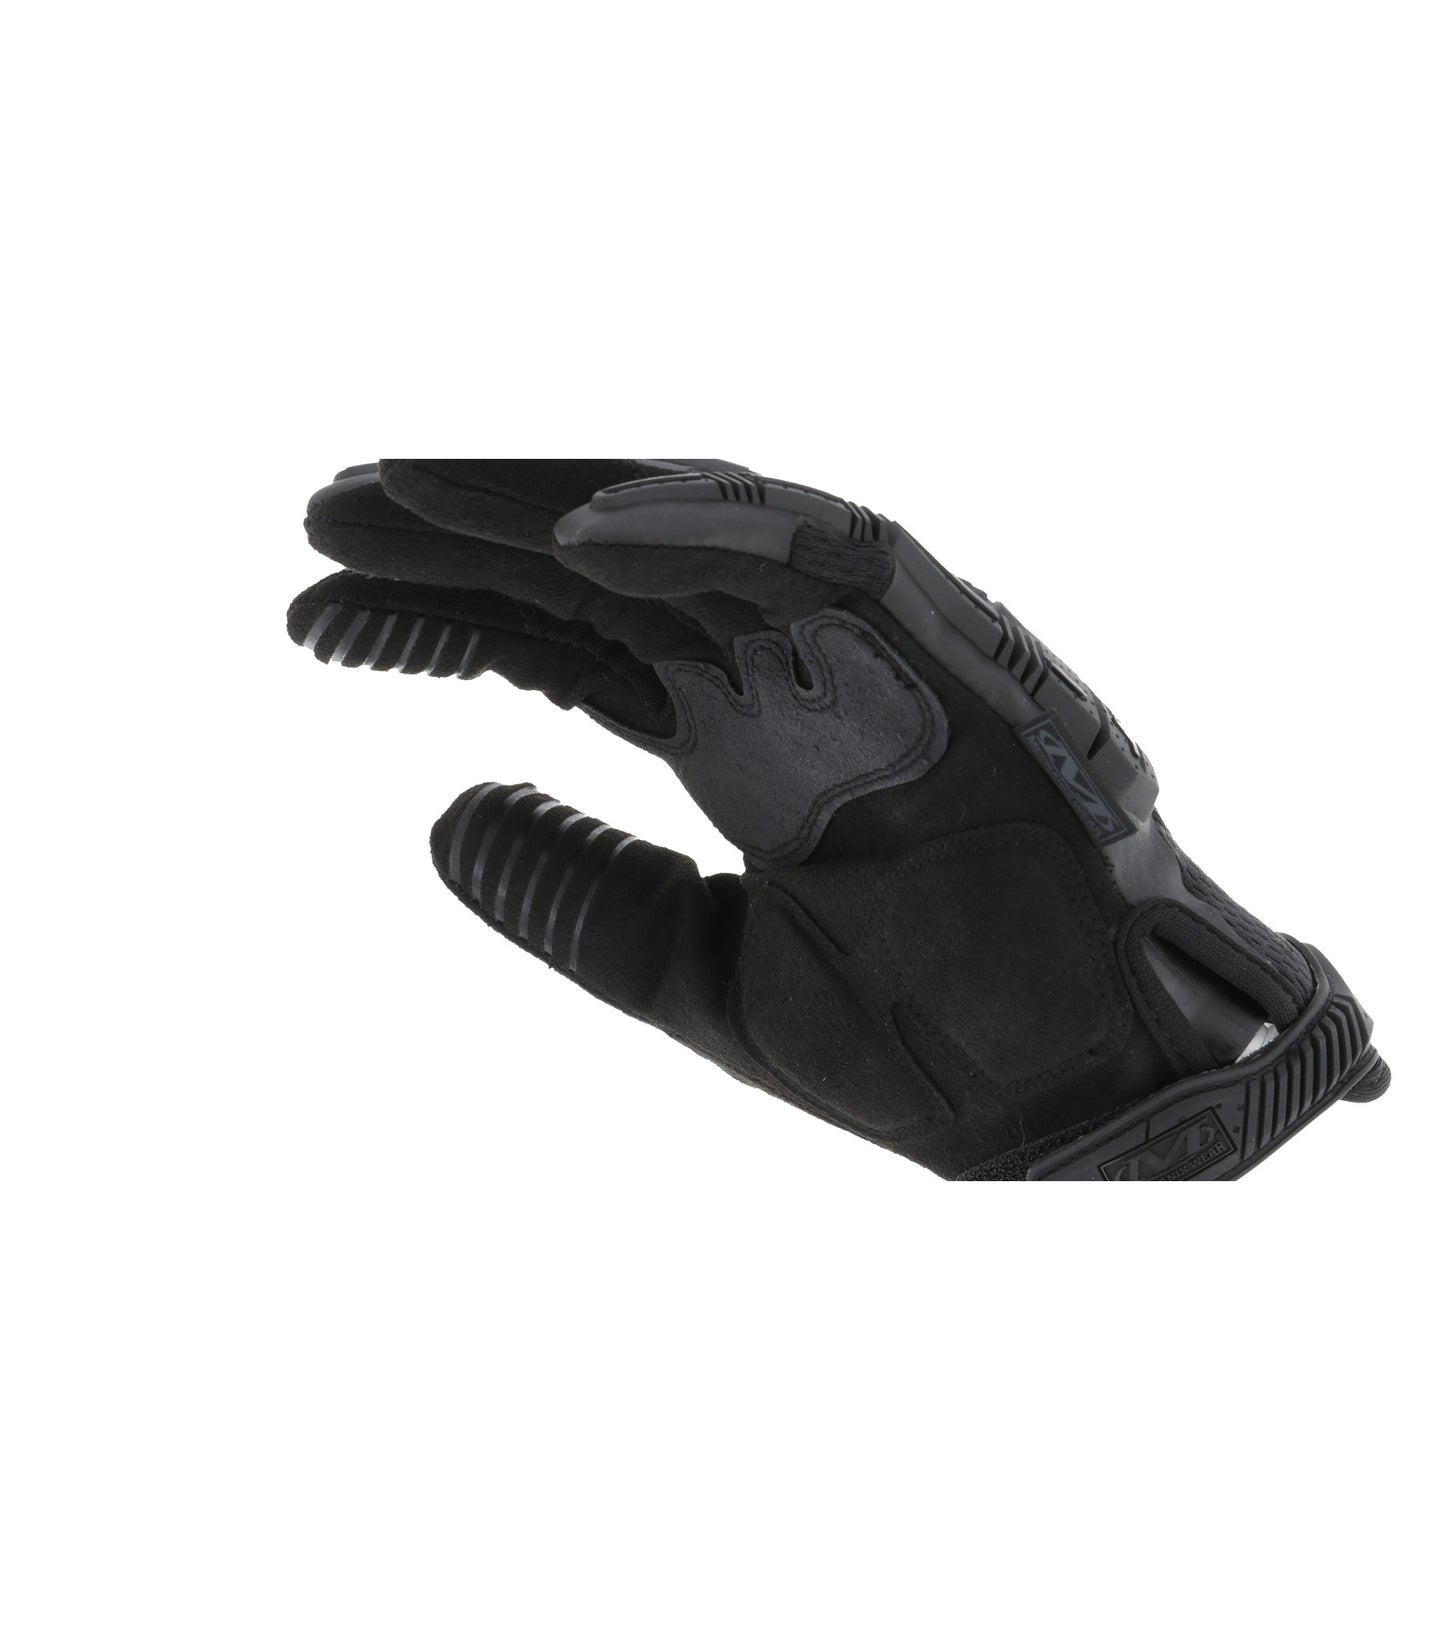 M-PACT Covert Gloves